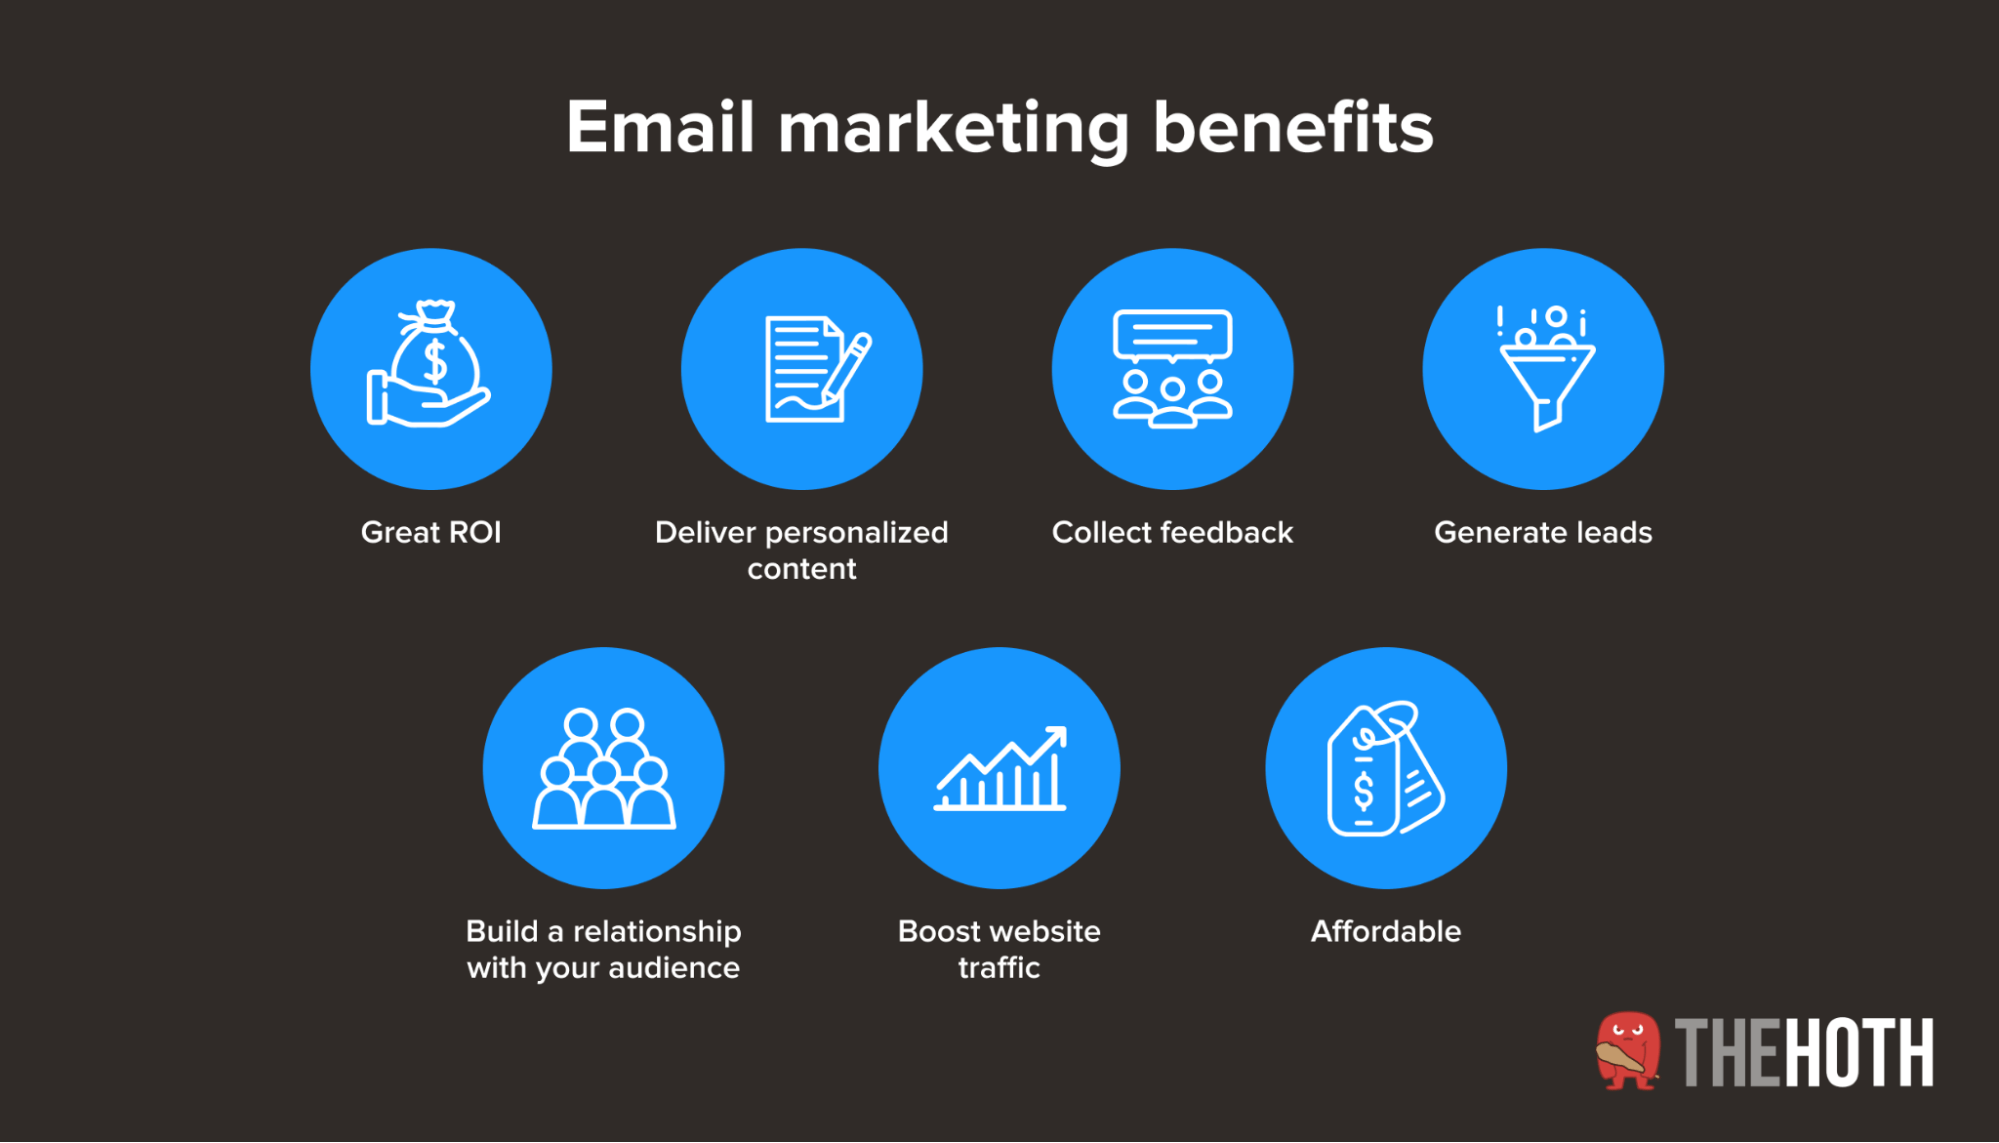 The benefits of email marketing campaigns